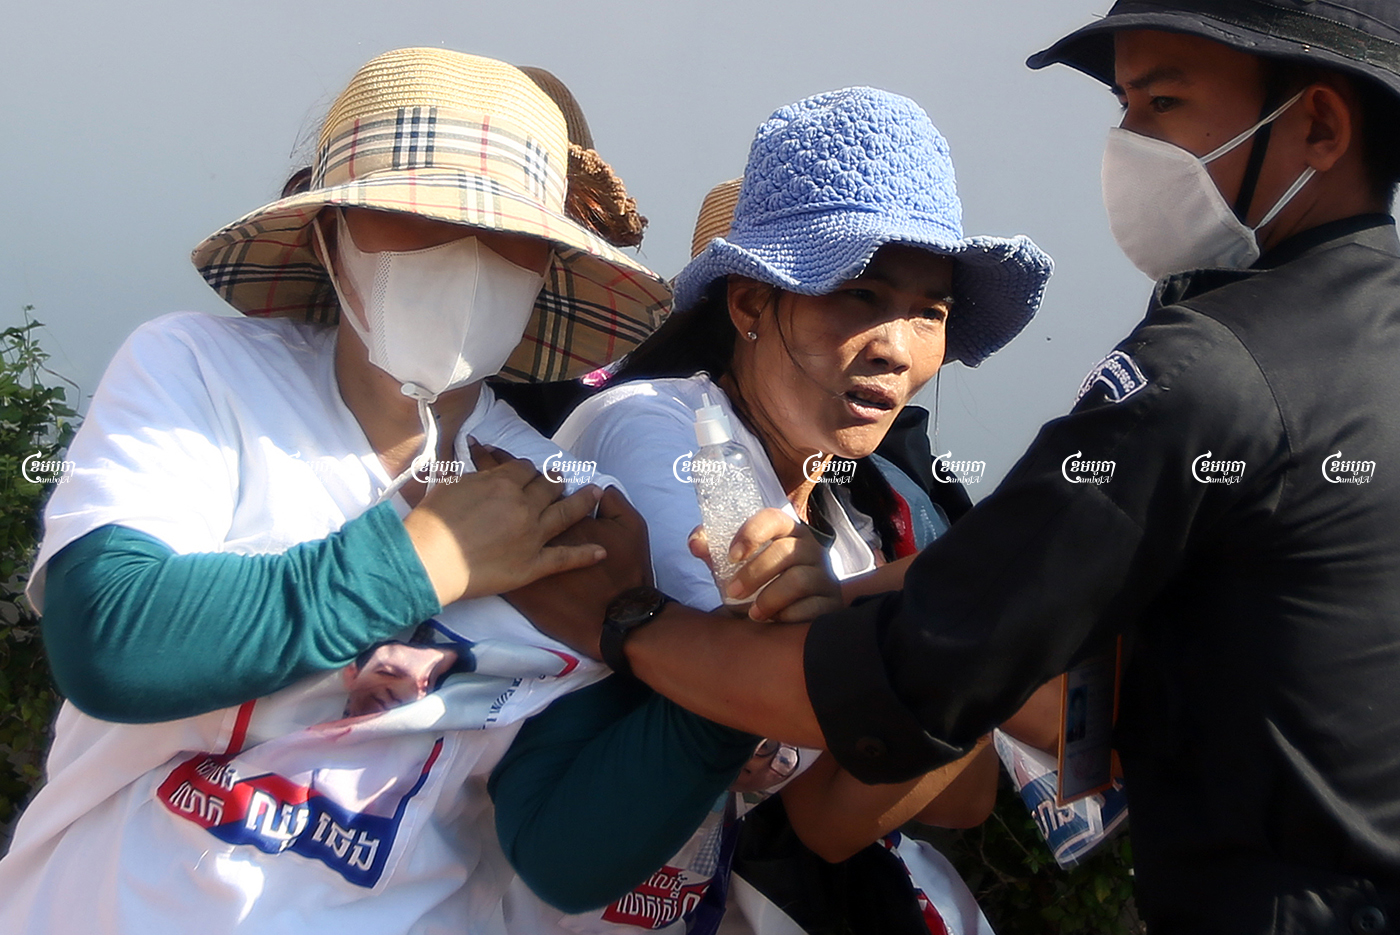 Security personnel seize banners from relatives of imprisoned CNRP members at a small demonstration. Protestors had submitted a petition to a UN office in Phnom Penh seeking help in freeing their family members, Picture taken on June 4, 2021. CamboJA/ Pring Samrang